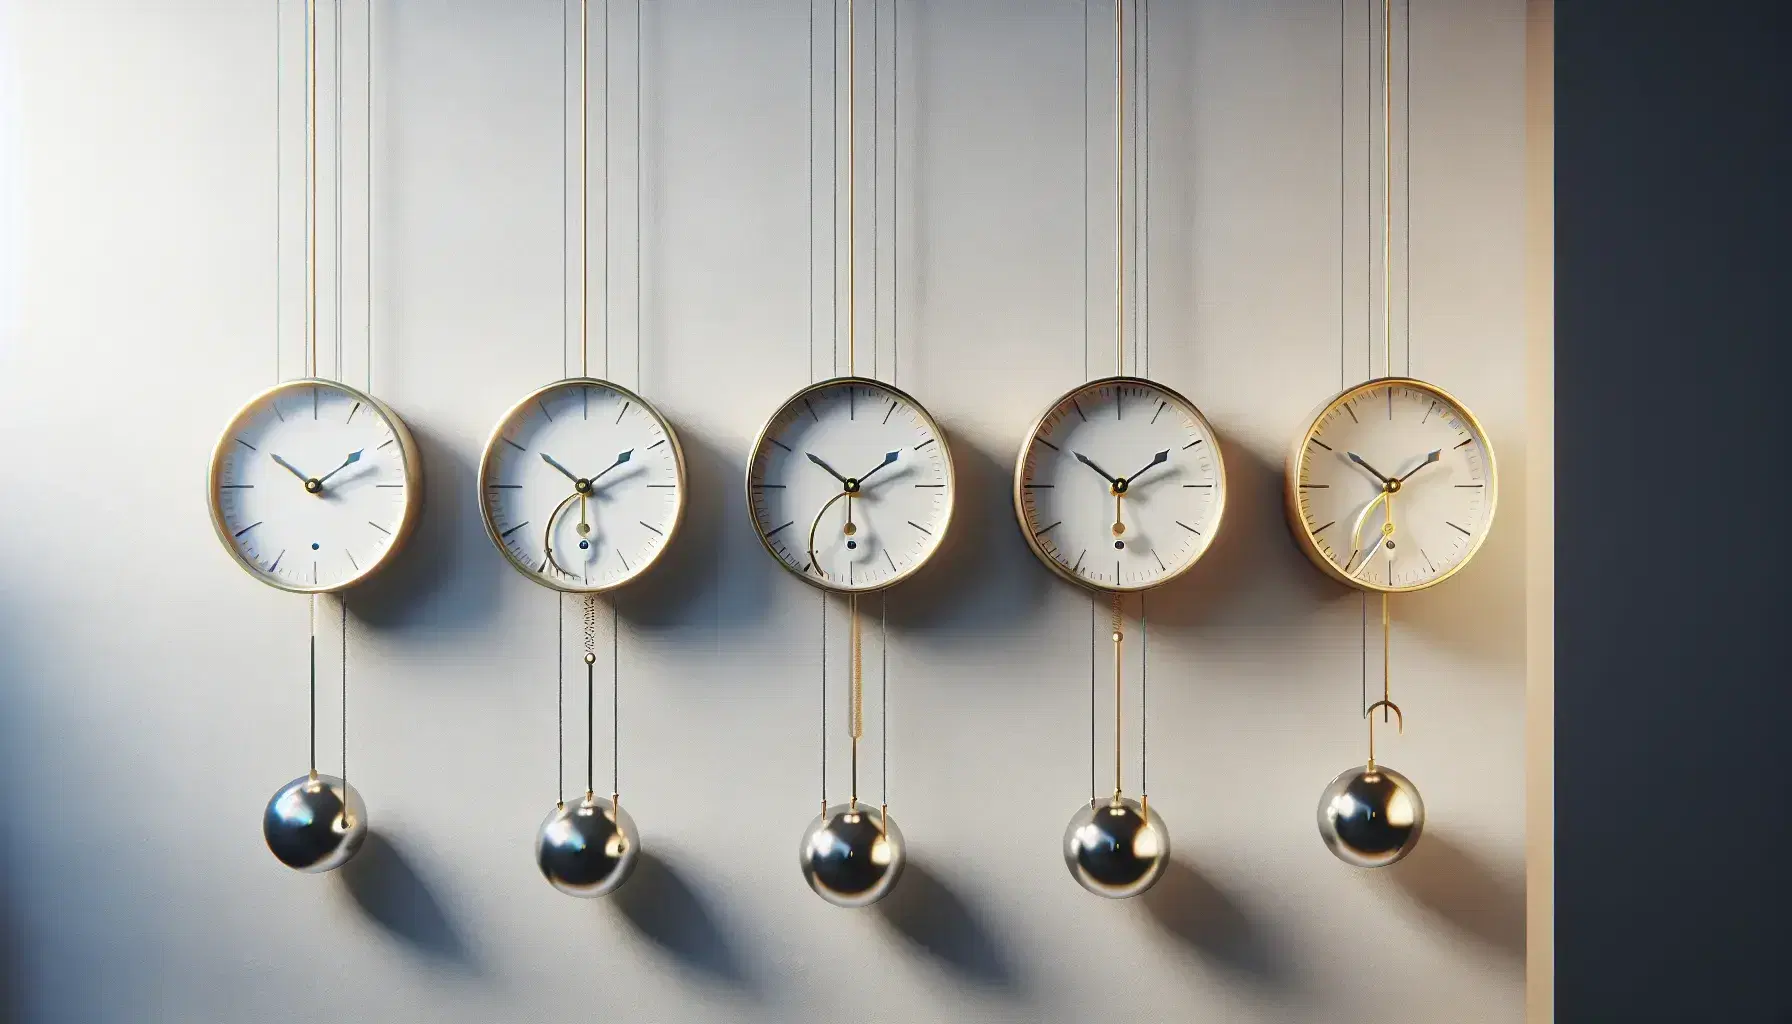 Four identical pendulum clocks on a wall showing a phase shift, with pendulums captured at various points in their swing against a neutral background.